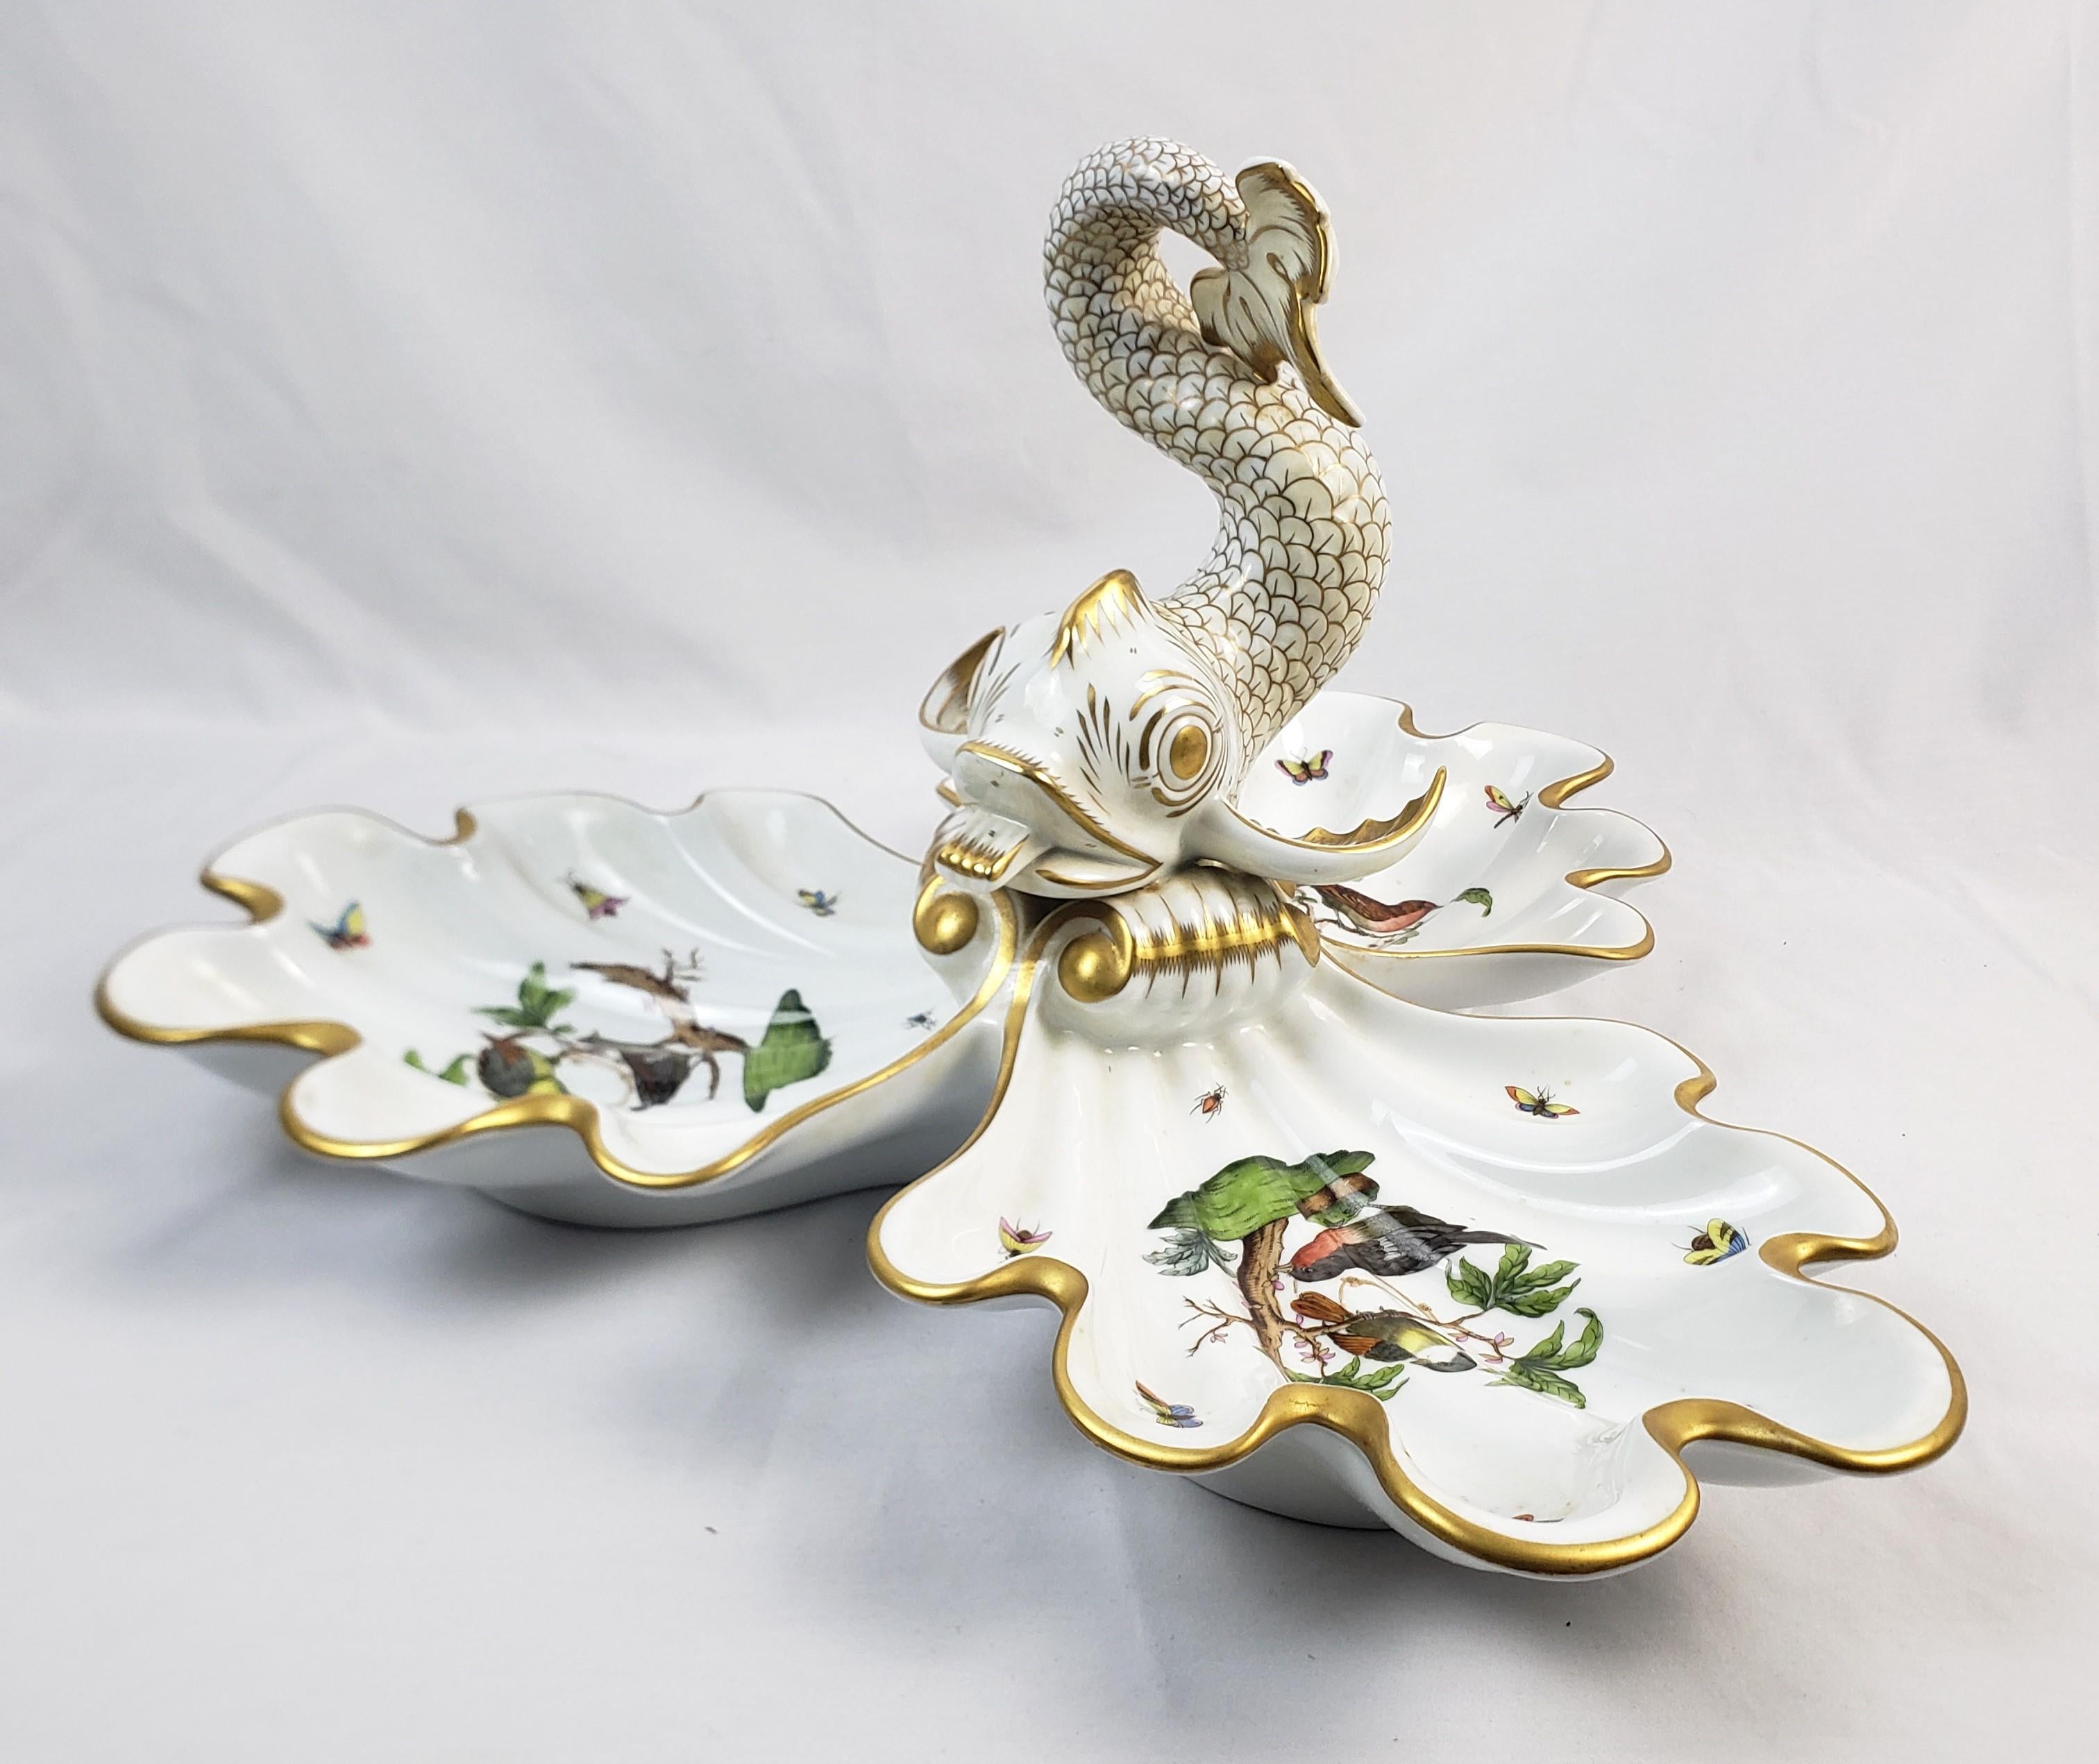 Hungarian Large Vintage Herend Porcelain Rothschild Bird Pattern Centerpiece with Coy Fish For Sale